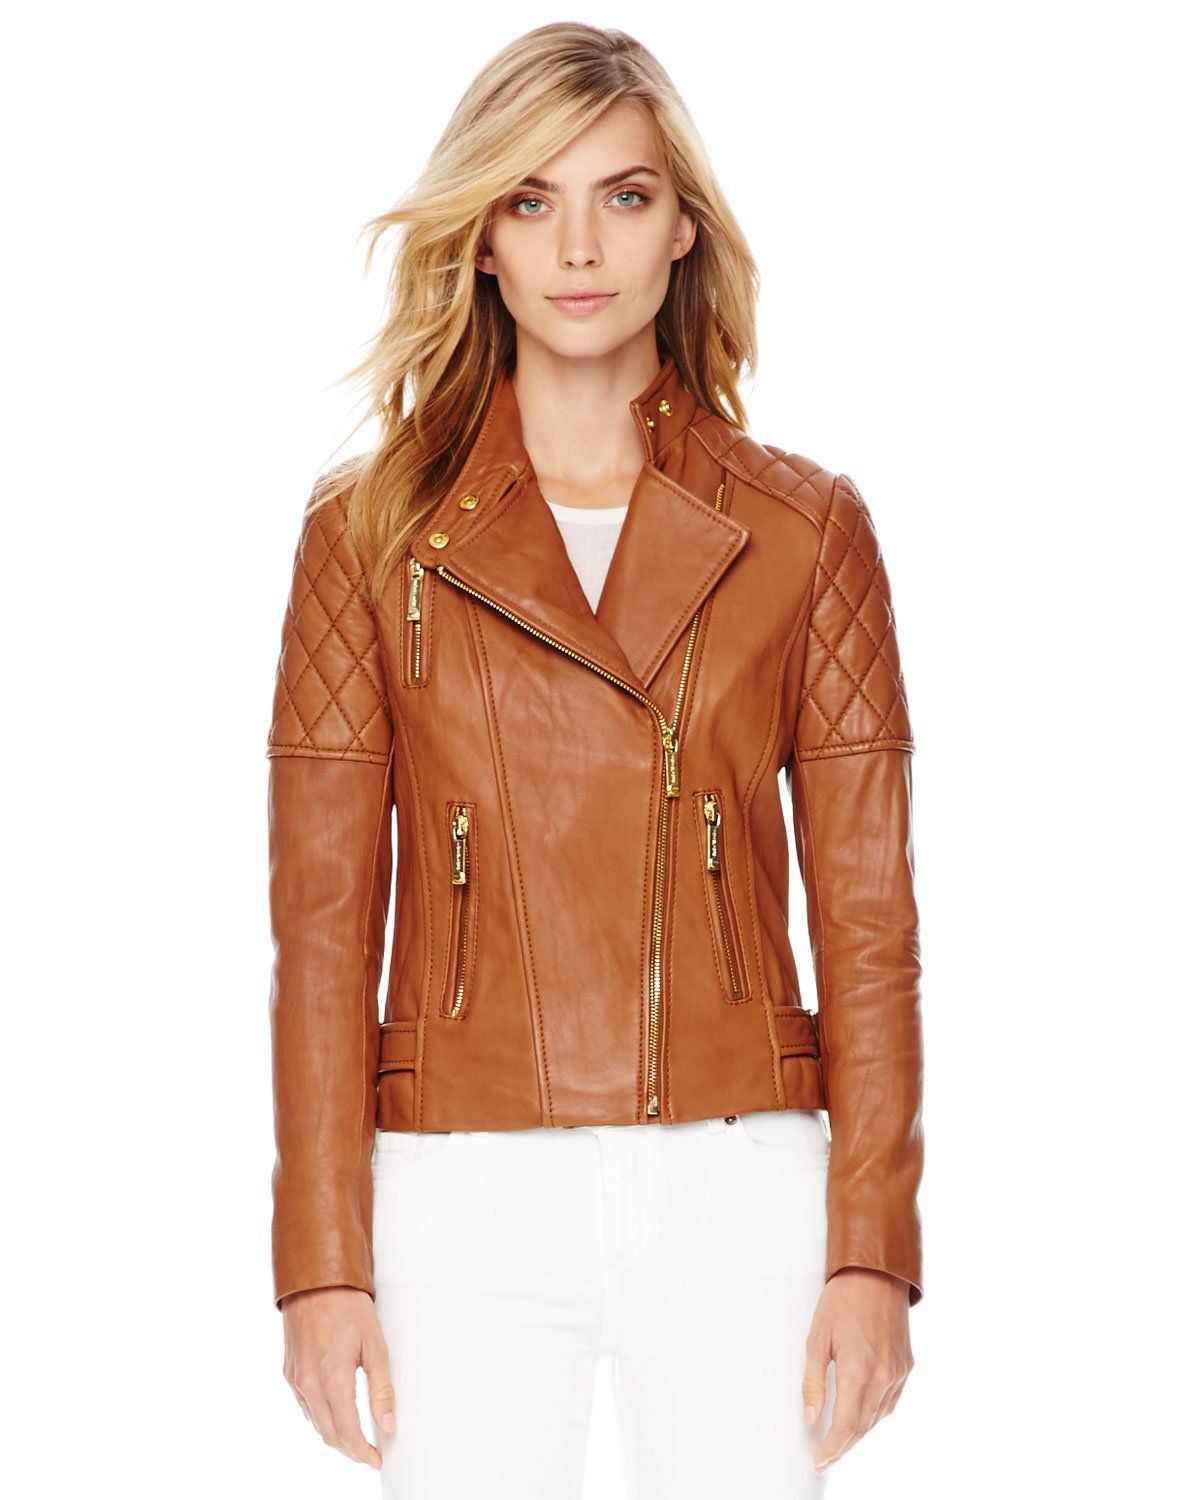 Lyst - Michael Kors Michael Quilted Leather Jacket in Brown1200 x 1500